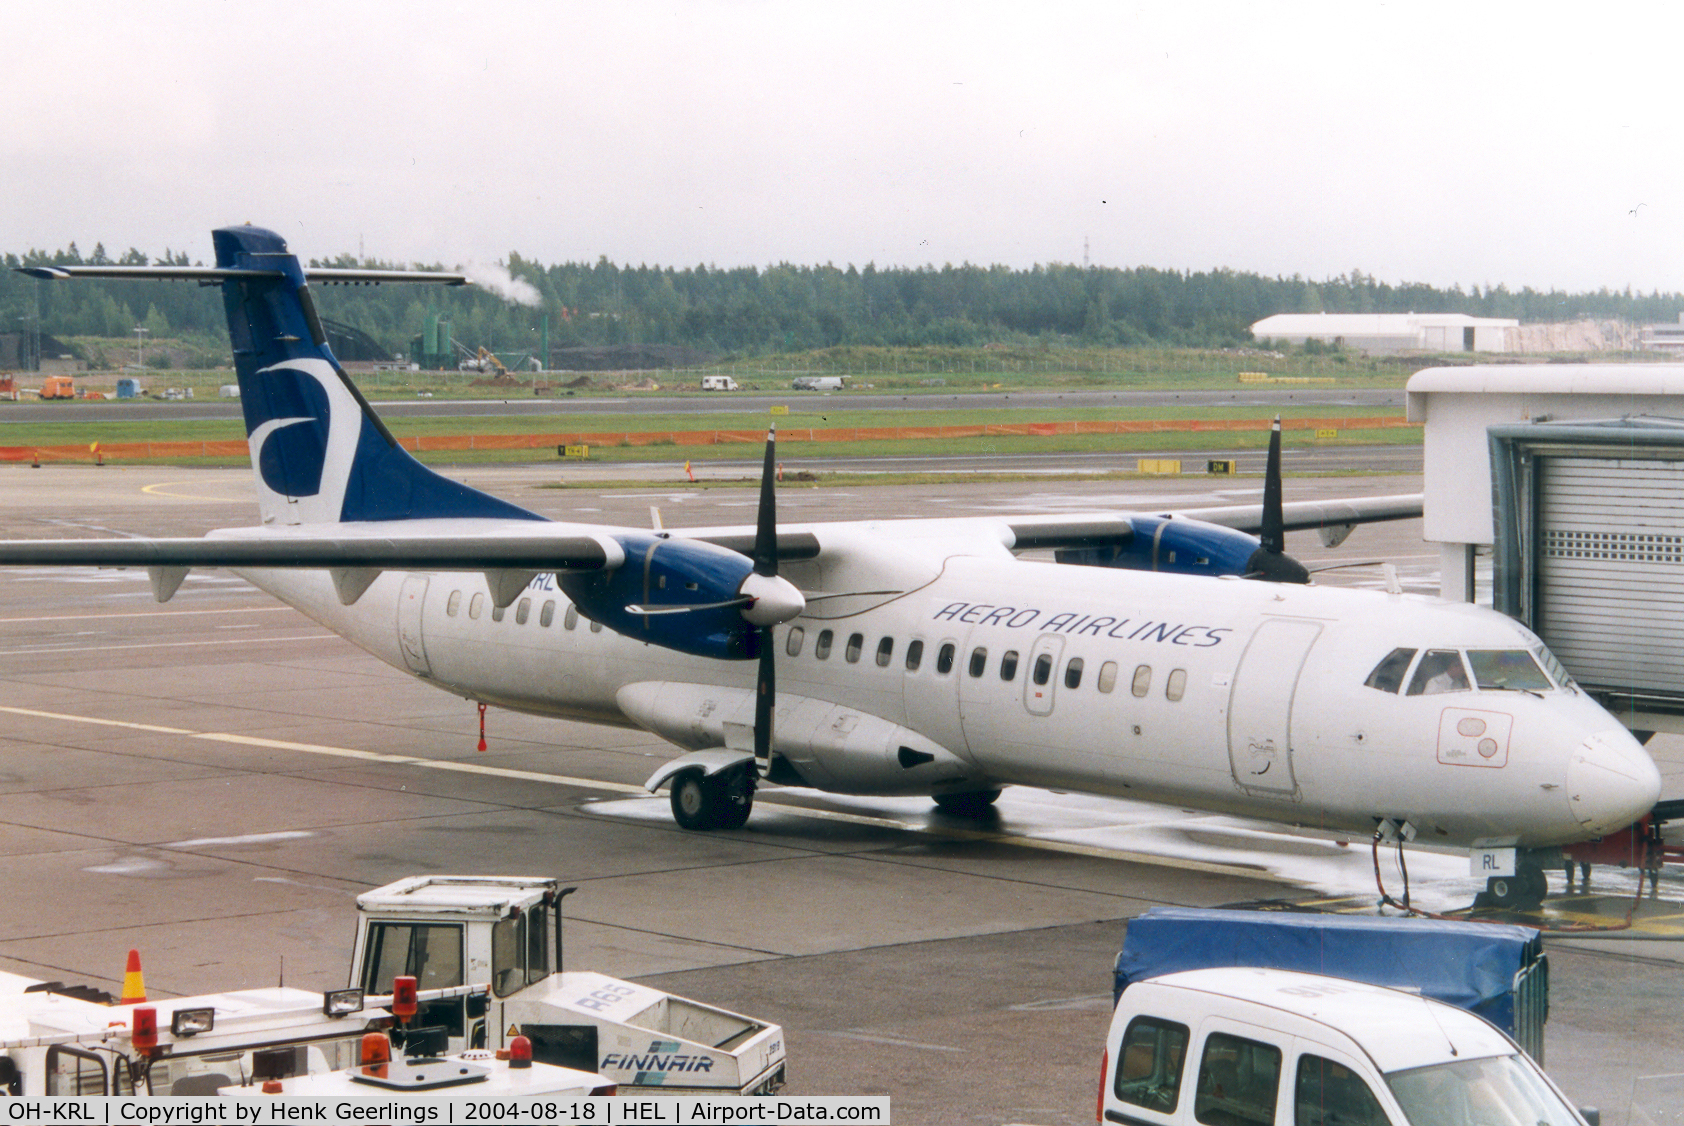 OH-KRL, 1992 ATR 72-201 C/N 332, Aero Airlines, ready for the flight to Tampere.